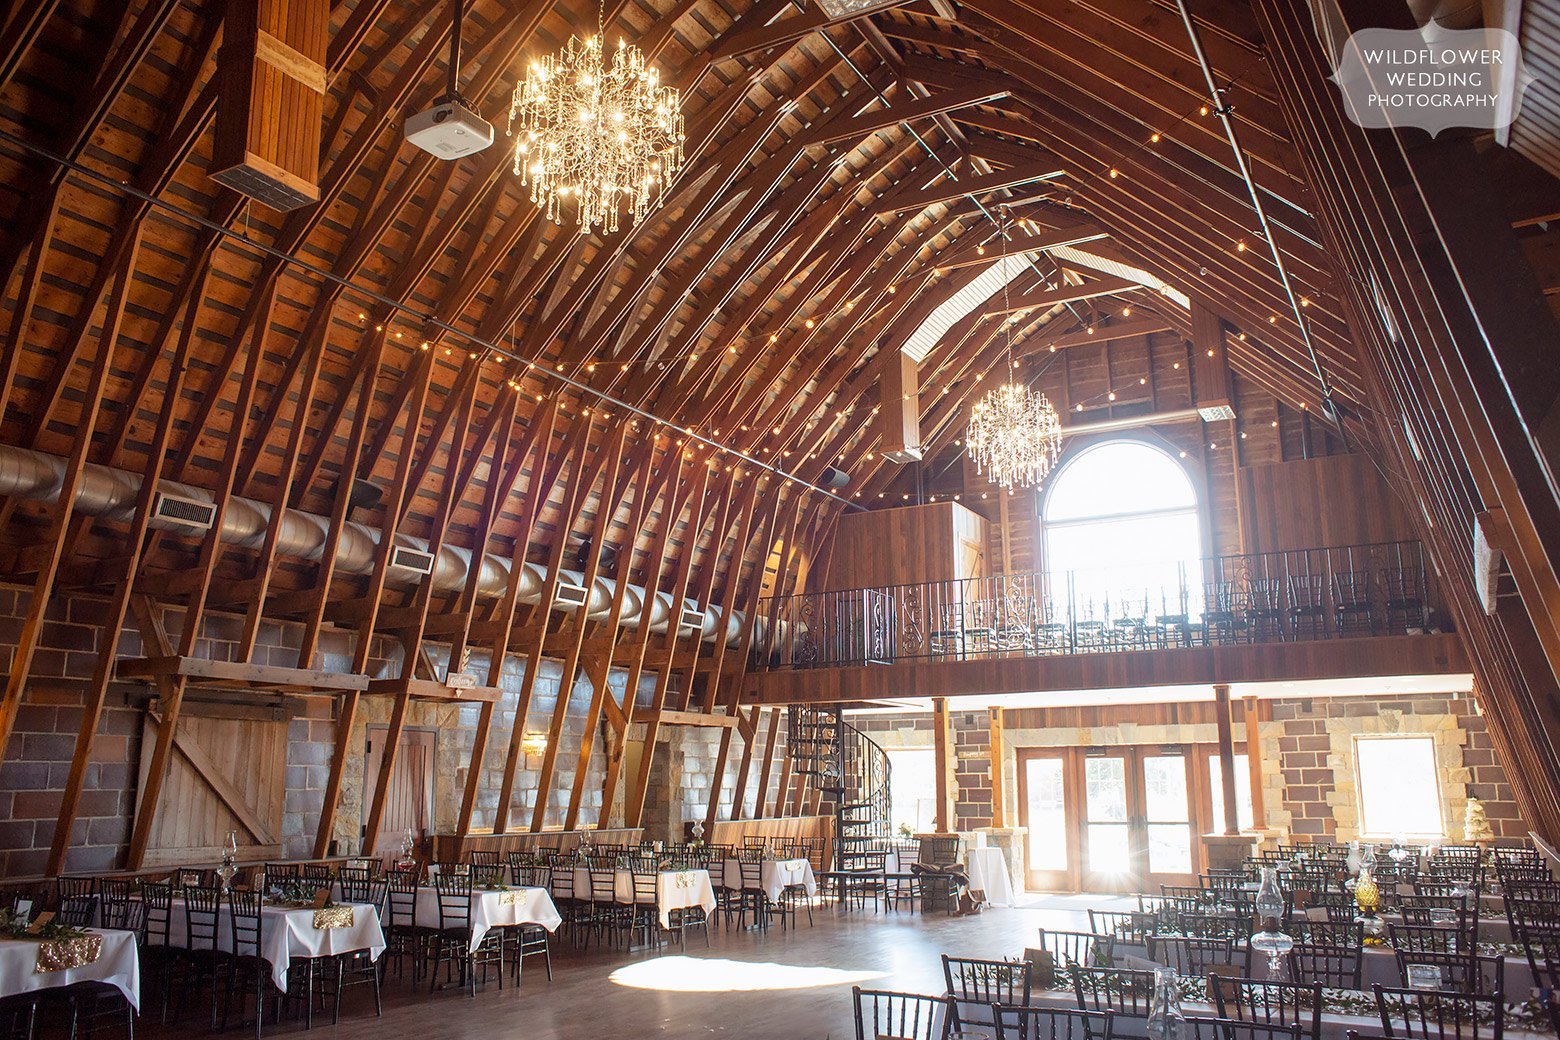 Inside view of the historic Brownstone Barn wedding reception space in Topeka, KS.